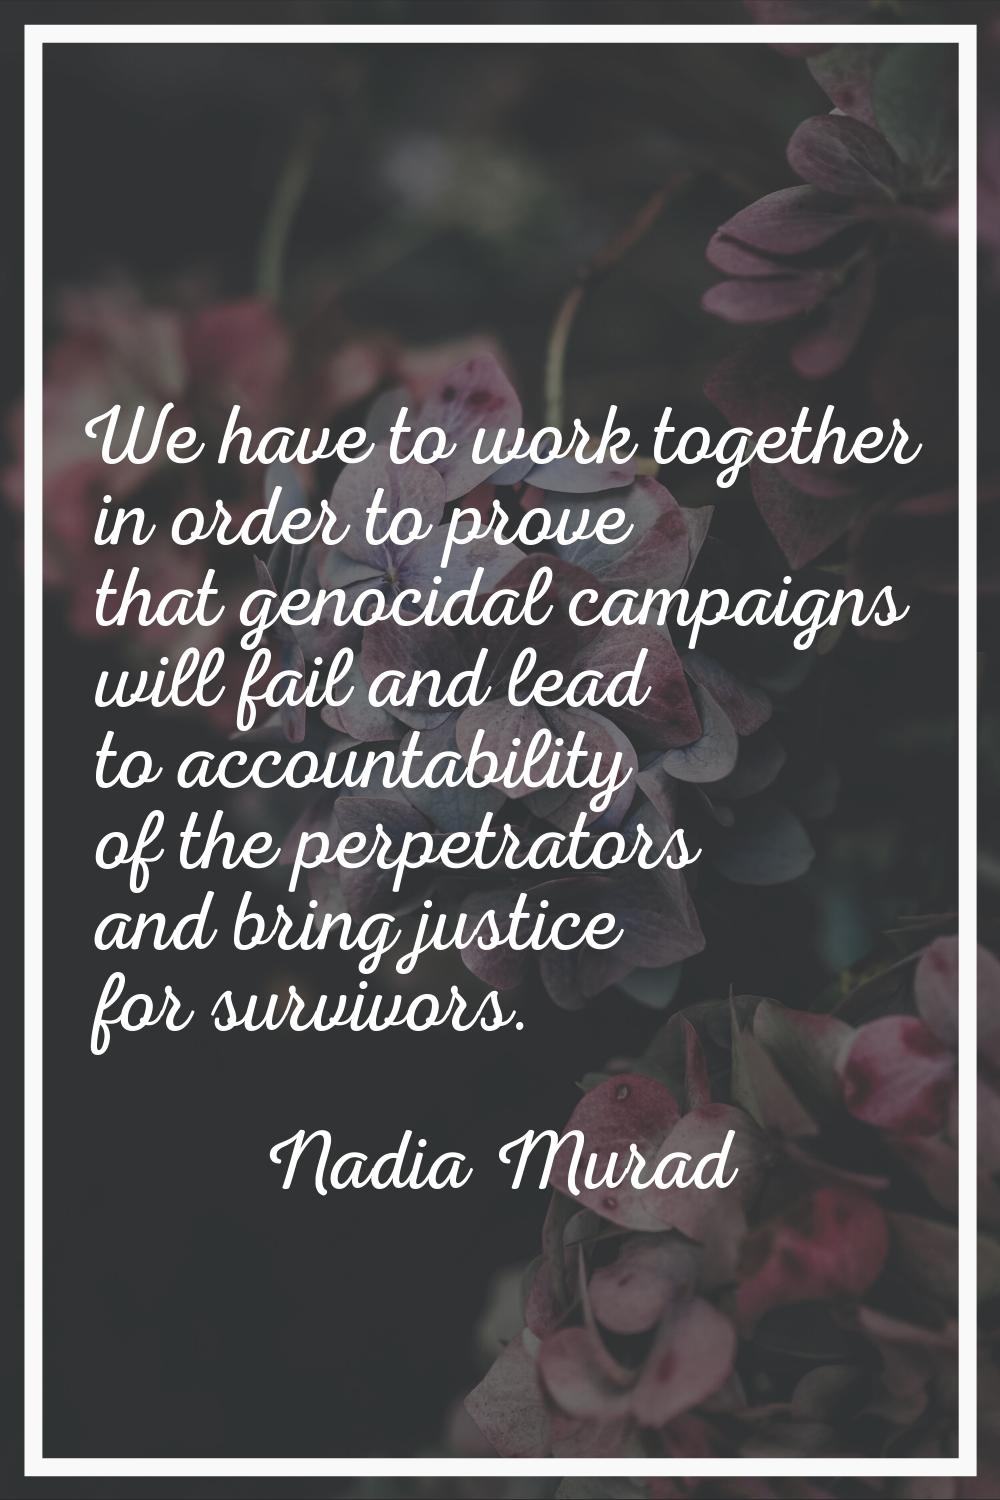 We have to work together in order to prove that genocidal campaigns will fail and lead to accountab